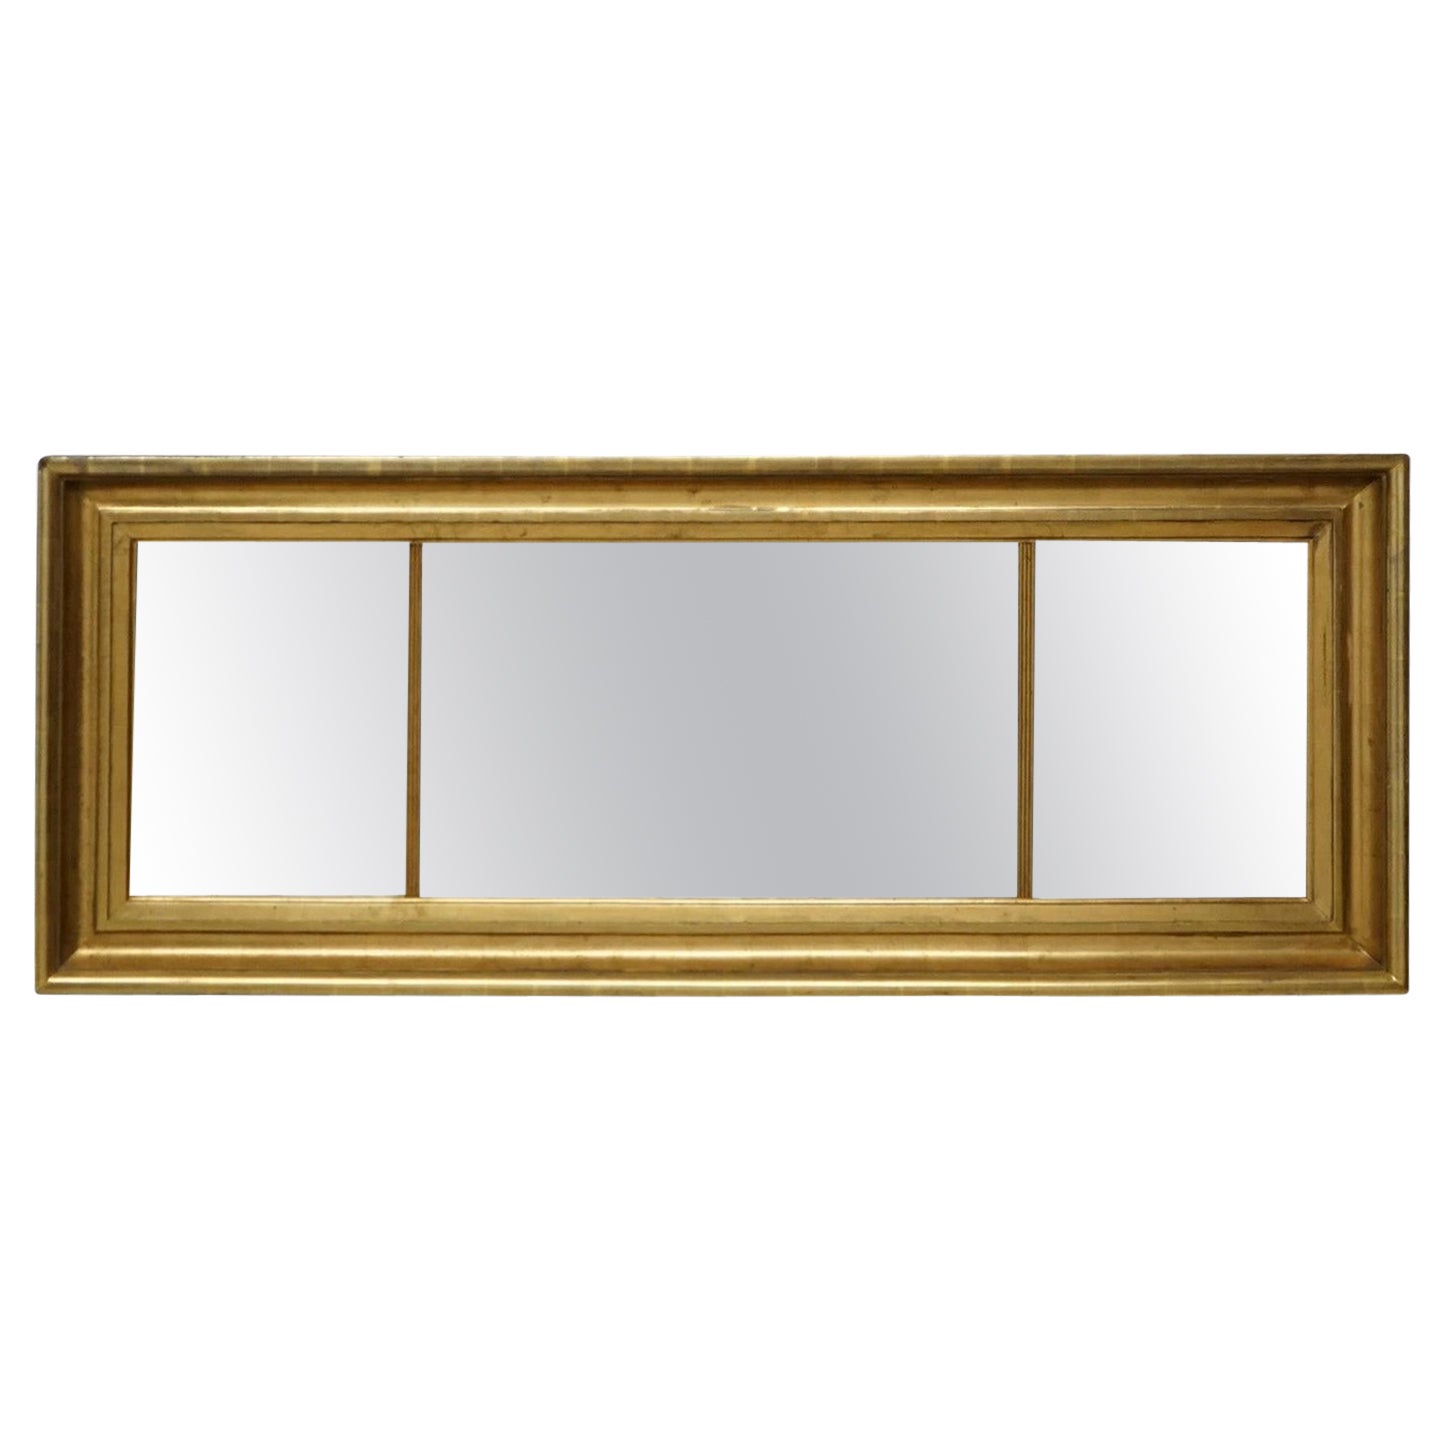 Antique American Empire First Finish Giltwood Triptych Wall Mirror, circa 1850 For Sale